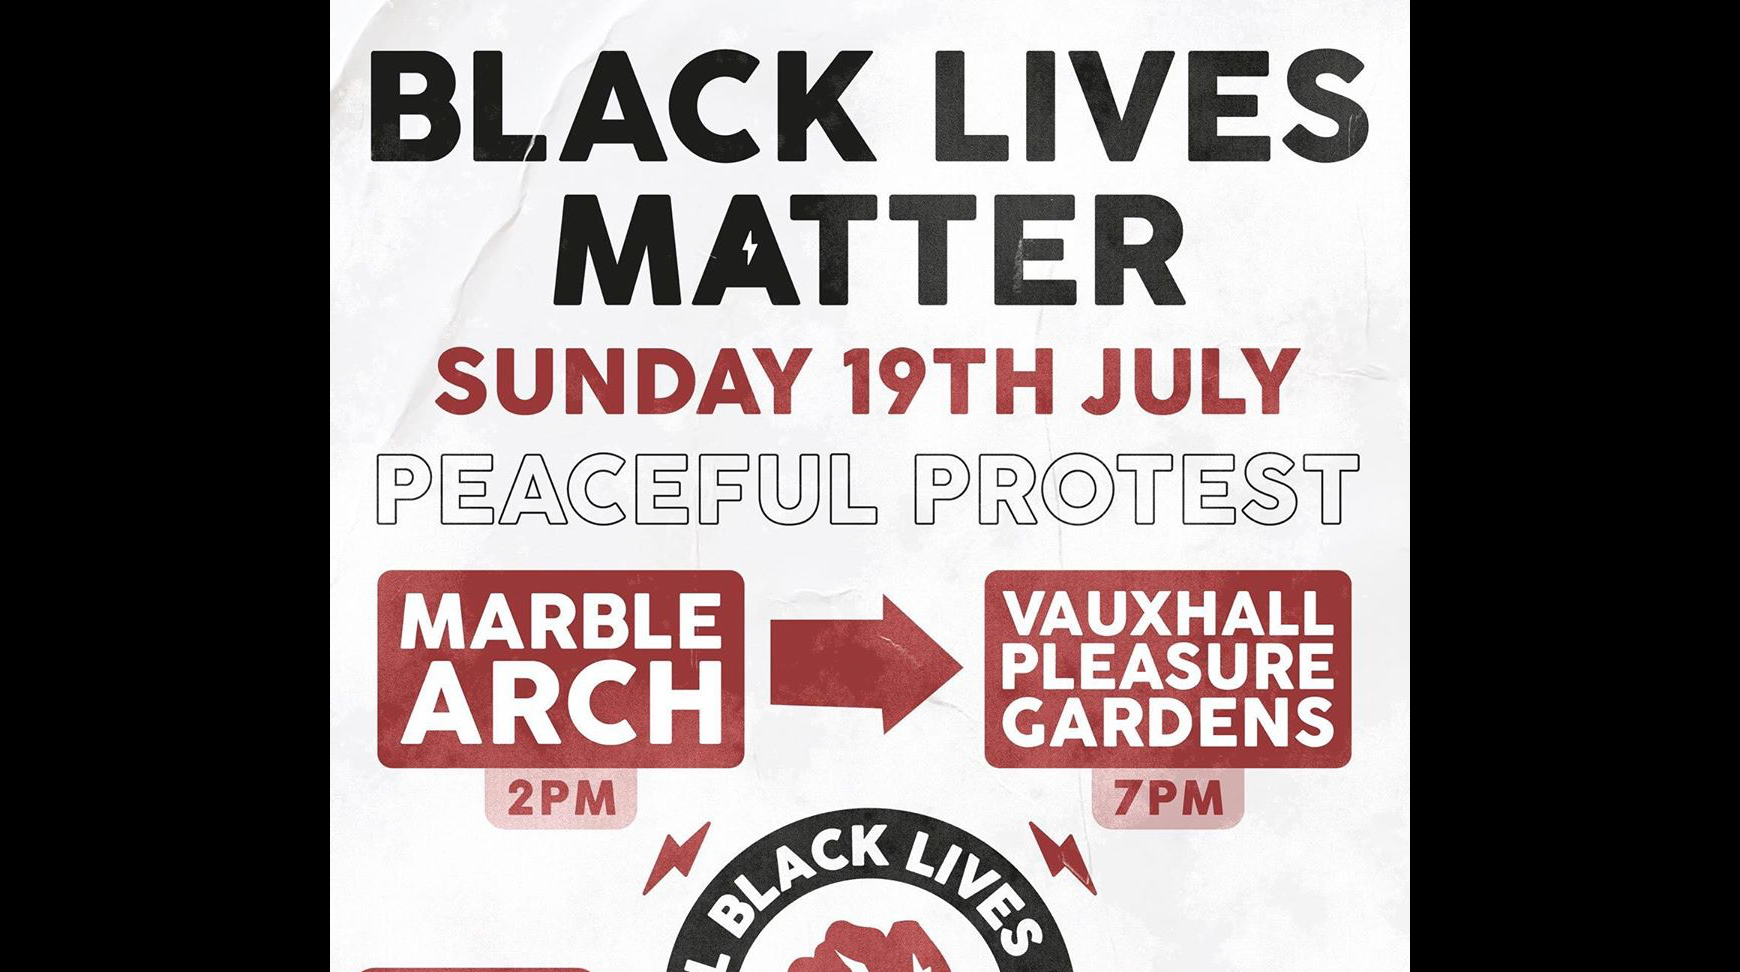 blm protest 19 july marble arch london